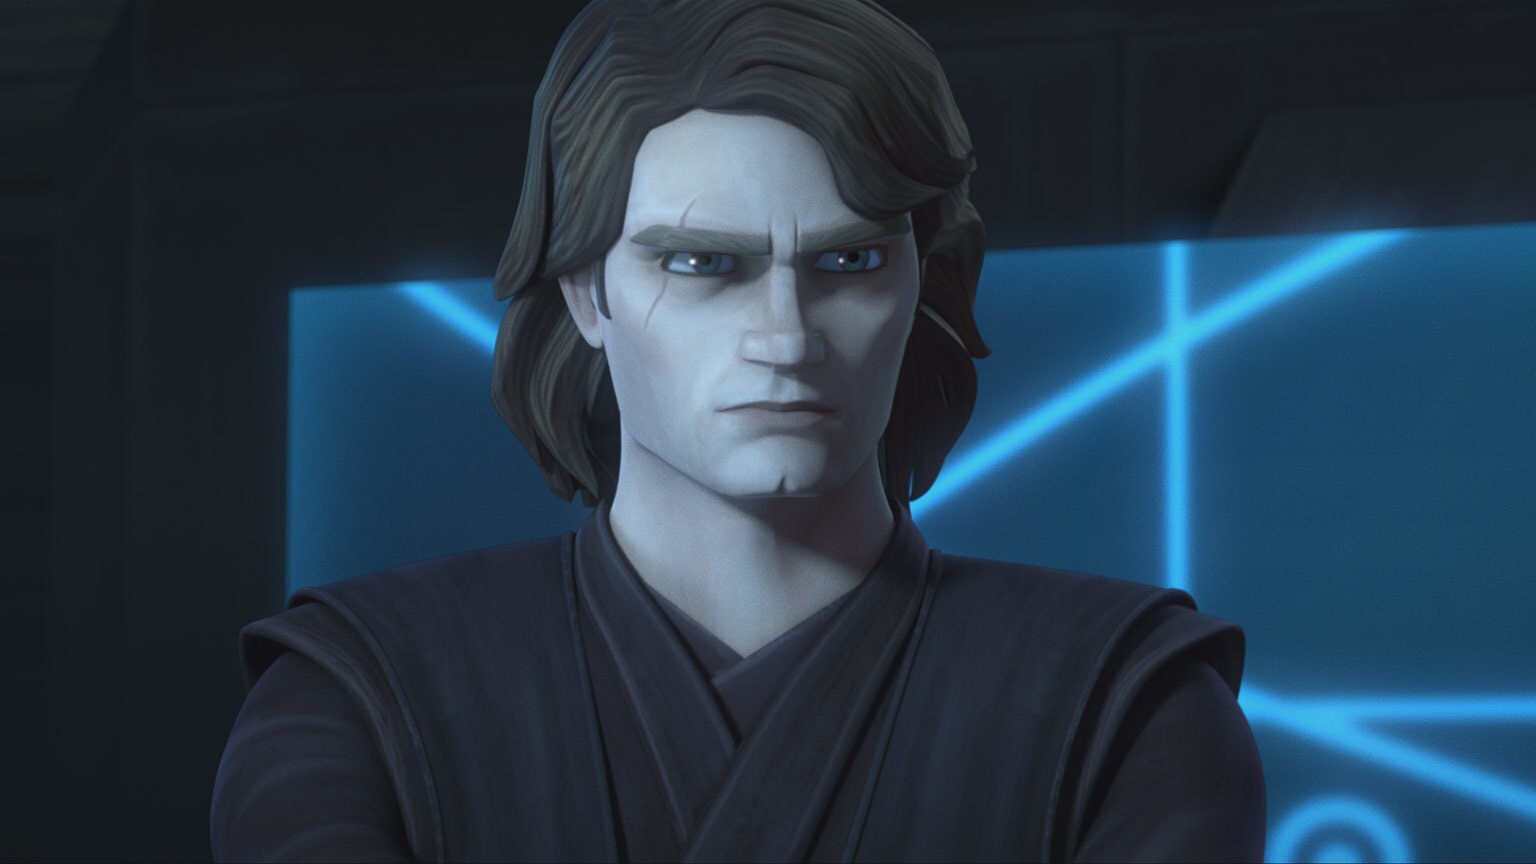 How Star Wars: The Clone Wars Further Explored the Journey of Anakin Skywalker